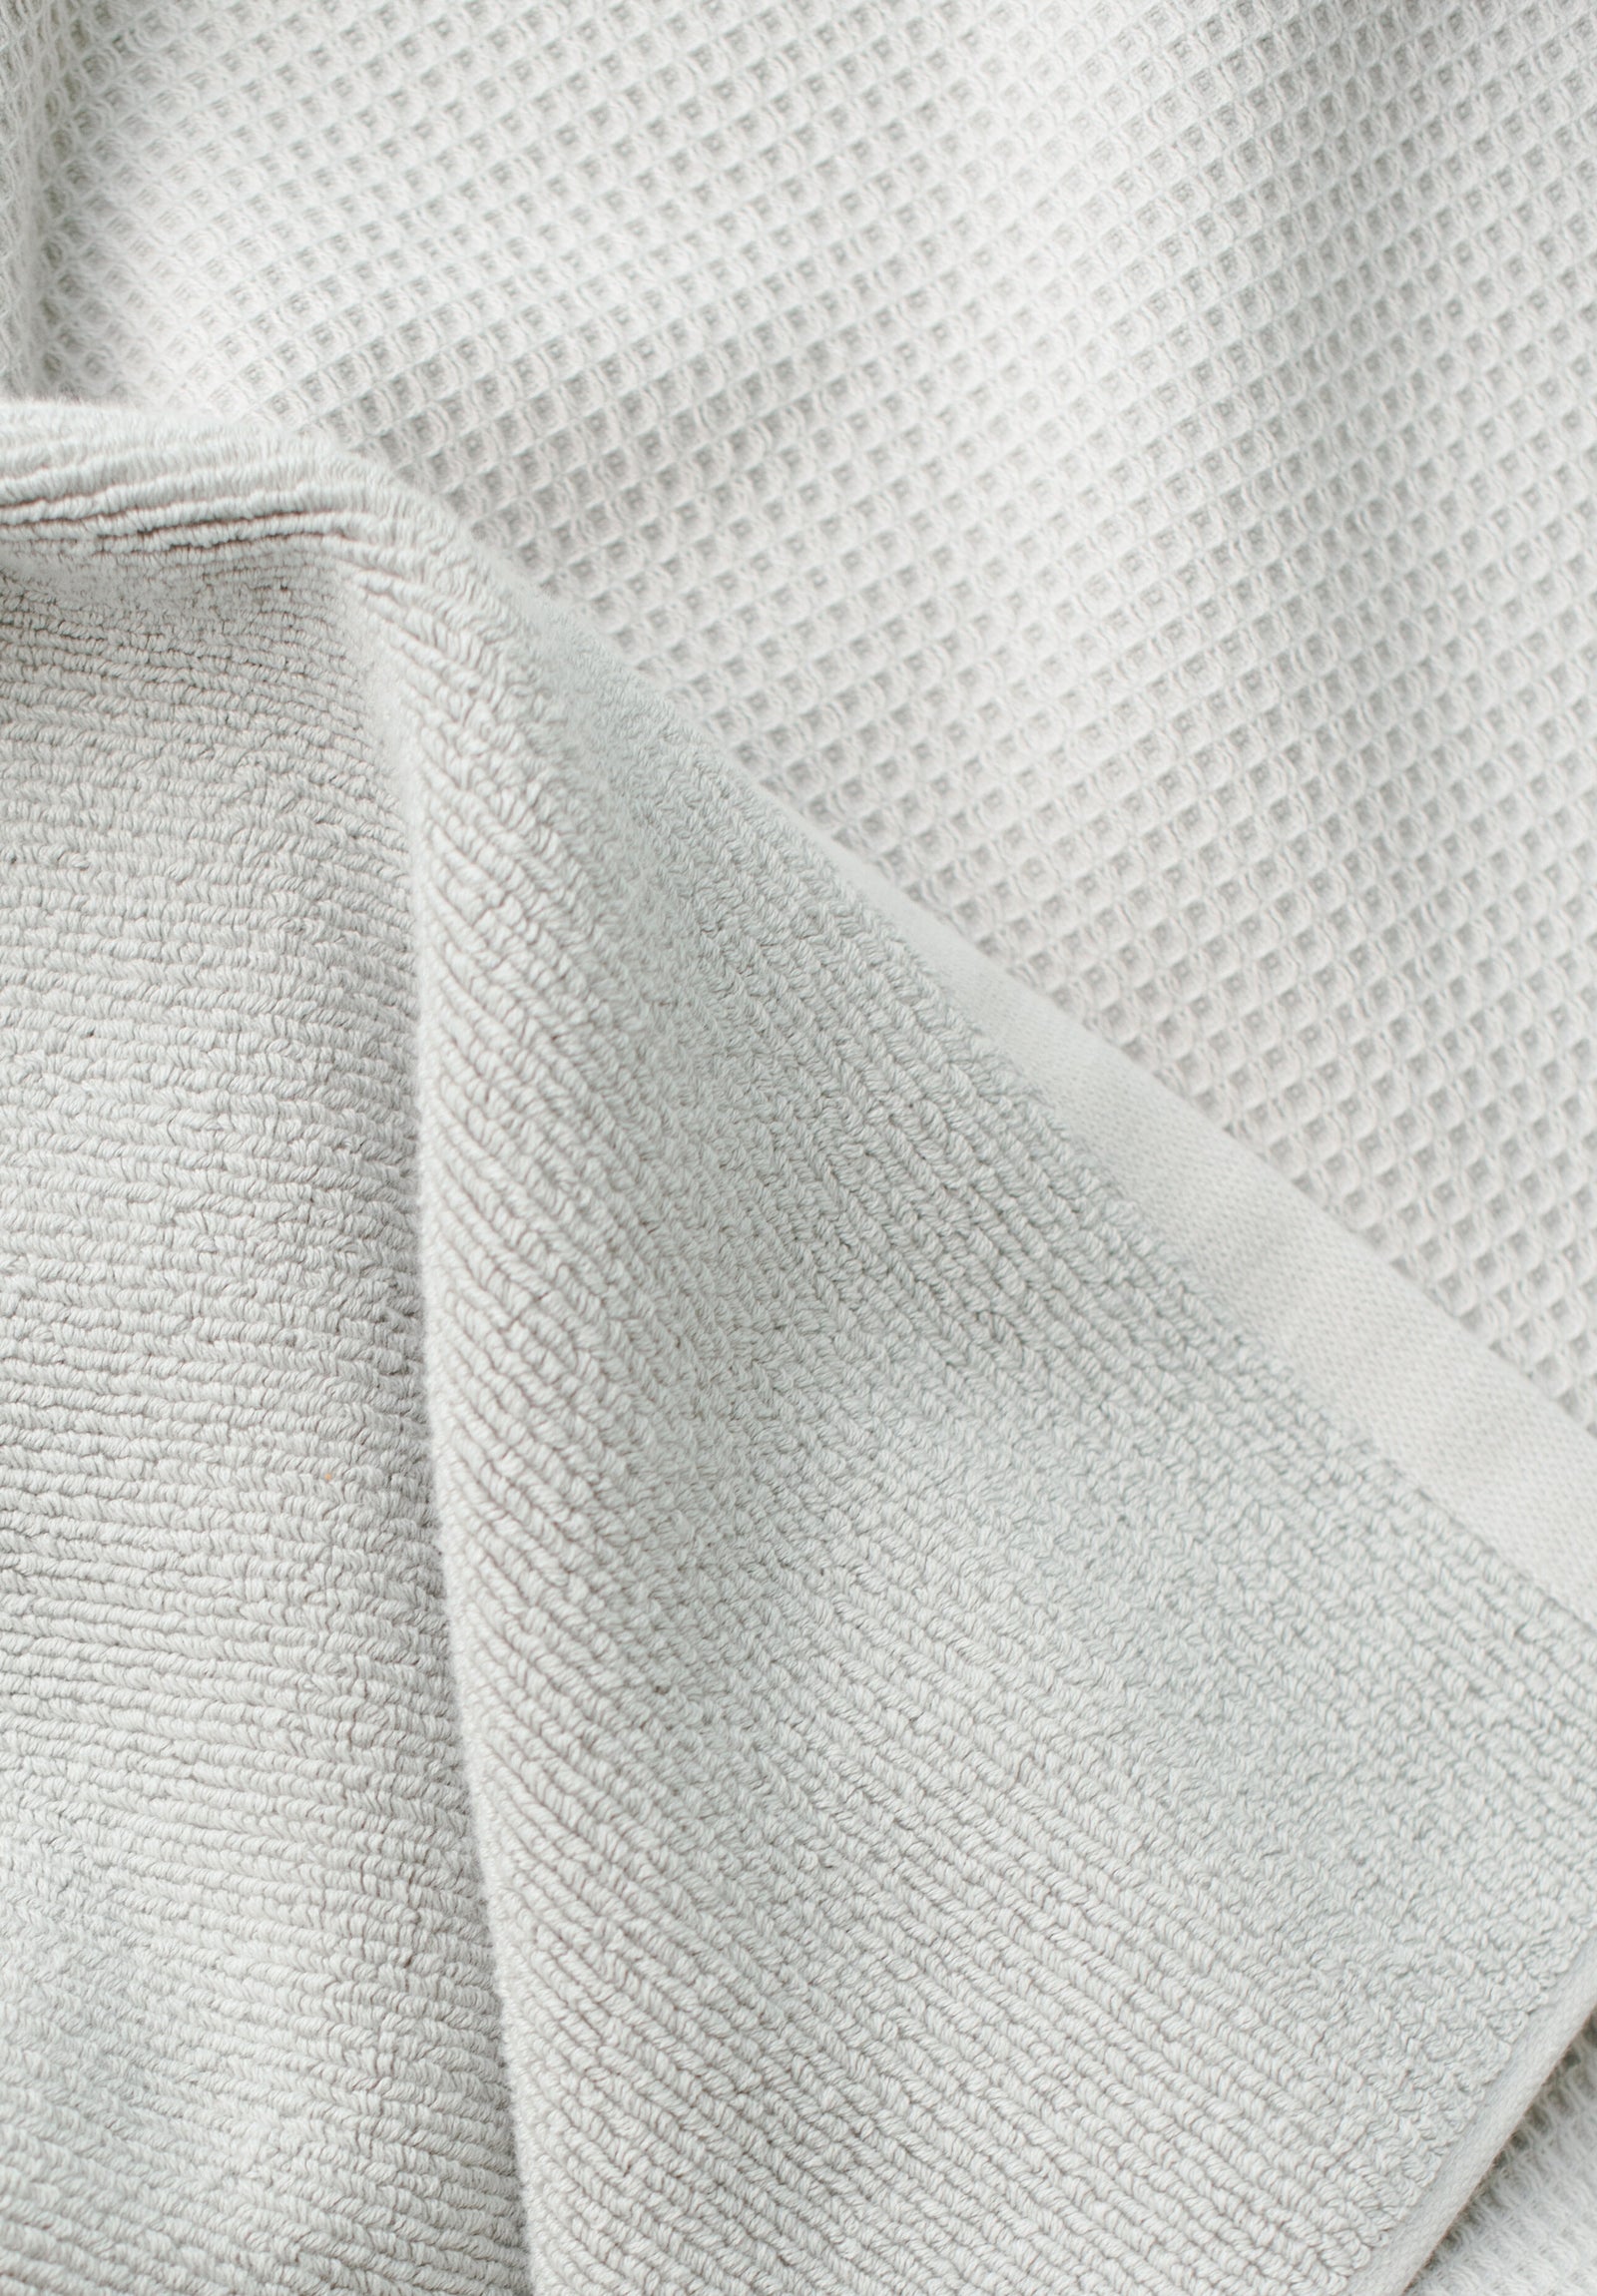 Waffle Bath Towel in the color Light Grey. Photo of Light Grey Waffle Bath Towel taken close up only showing the towel 